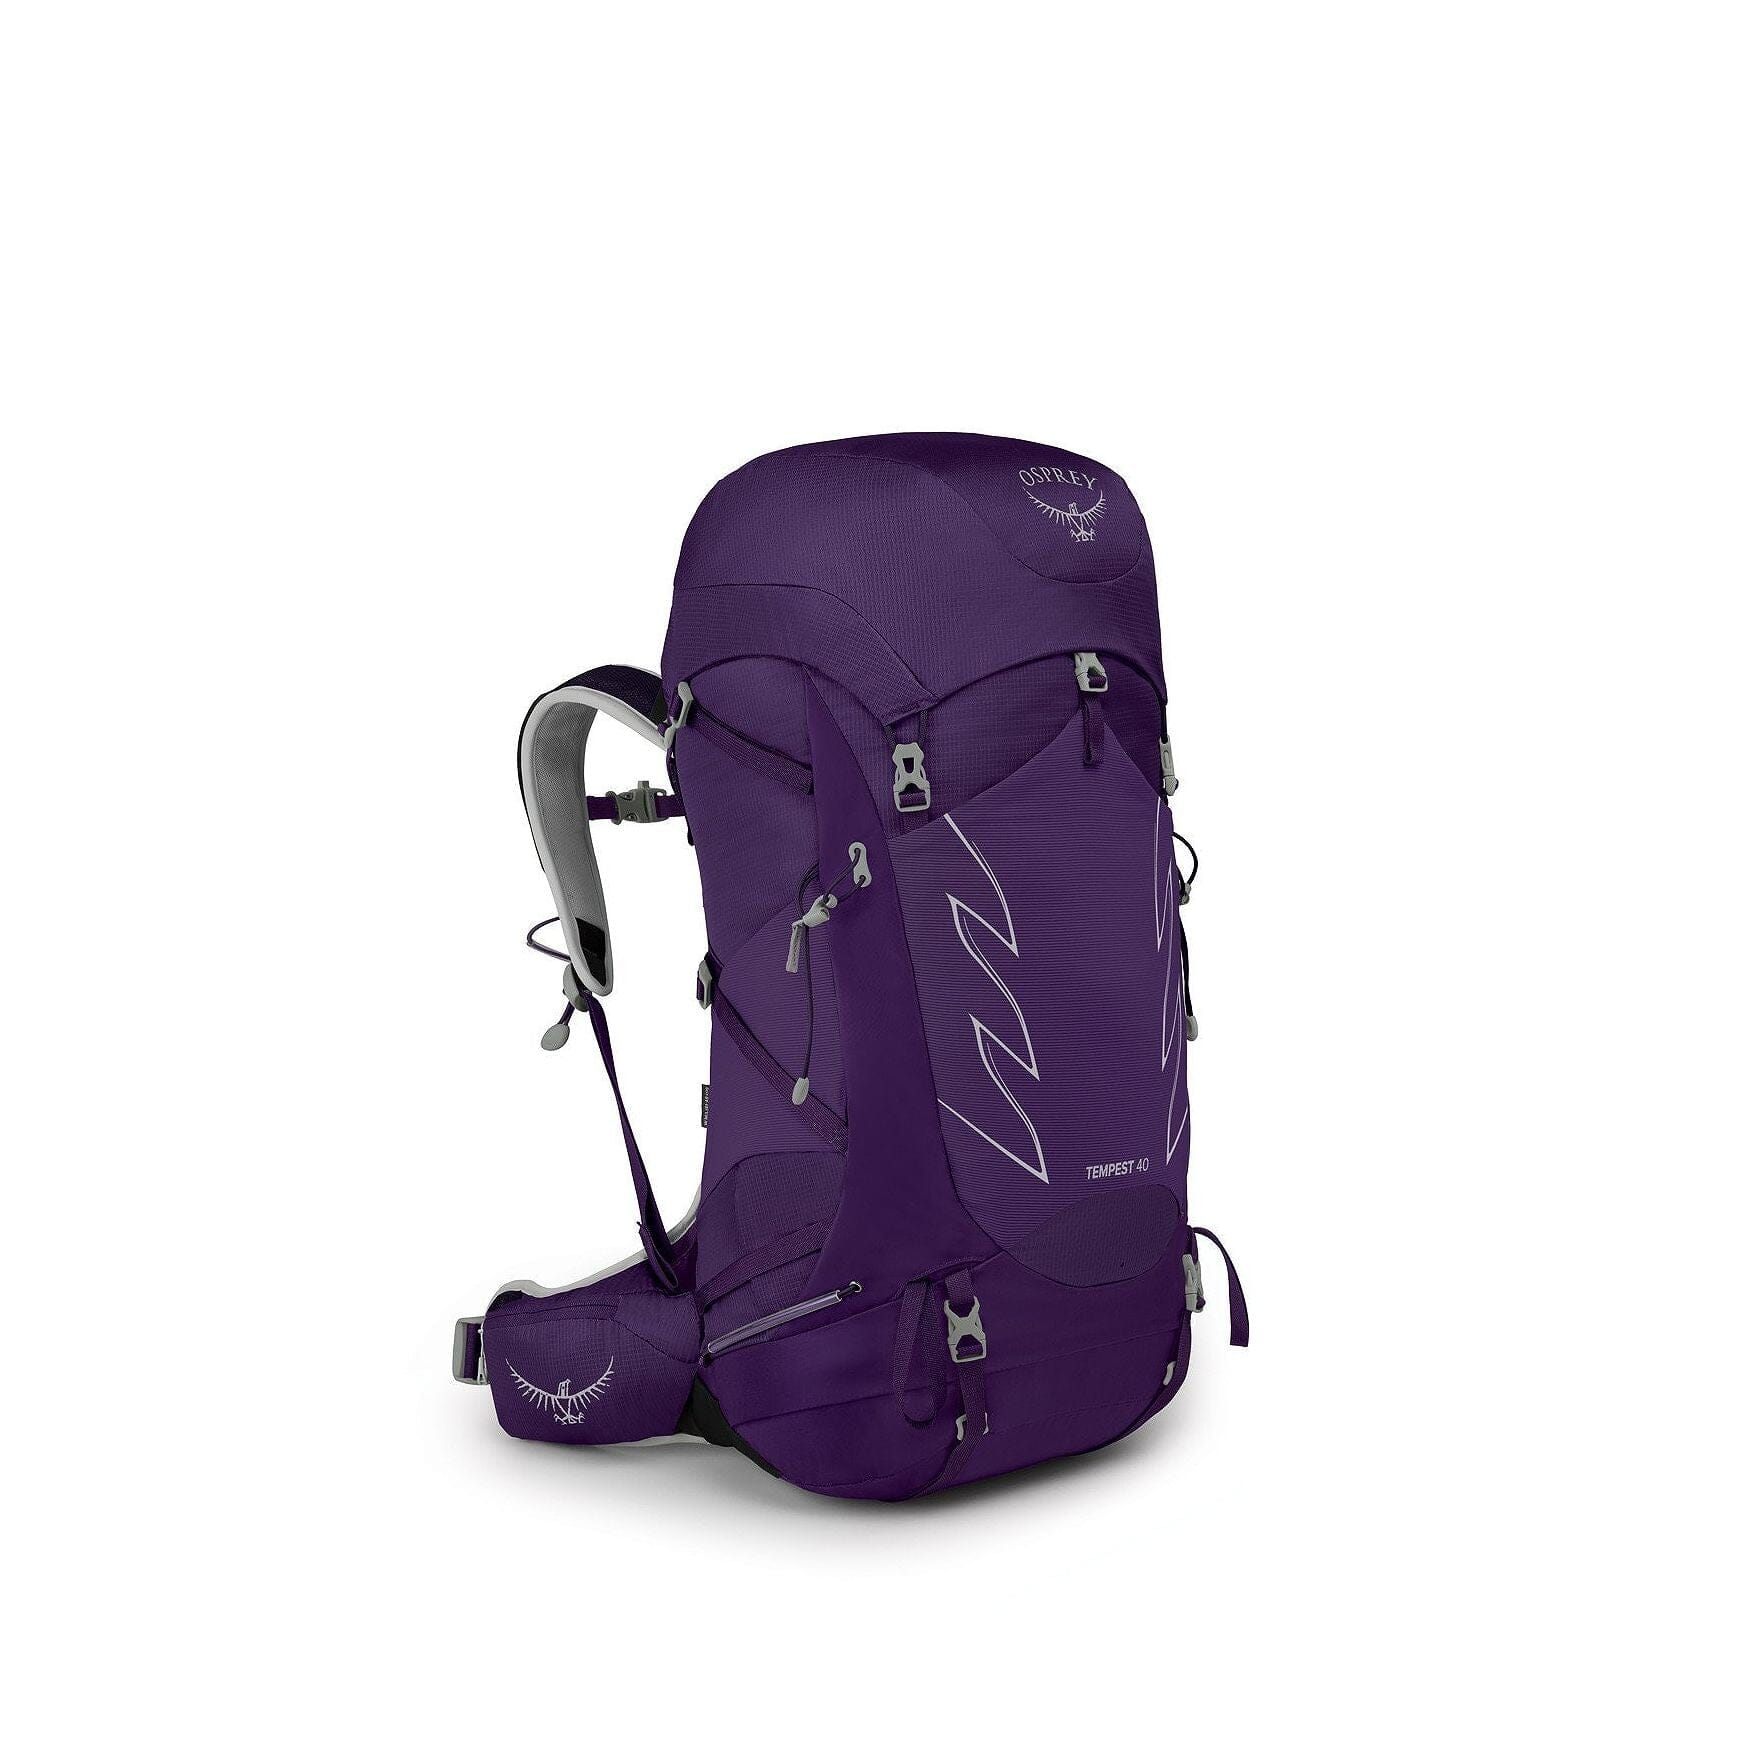 Osprey Tempest 40 Women's Day Hiking Backpack Violac Purple XS/S 